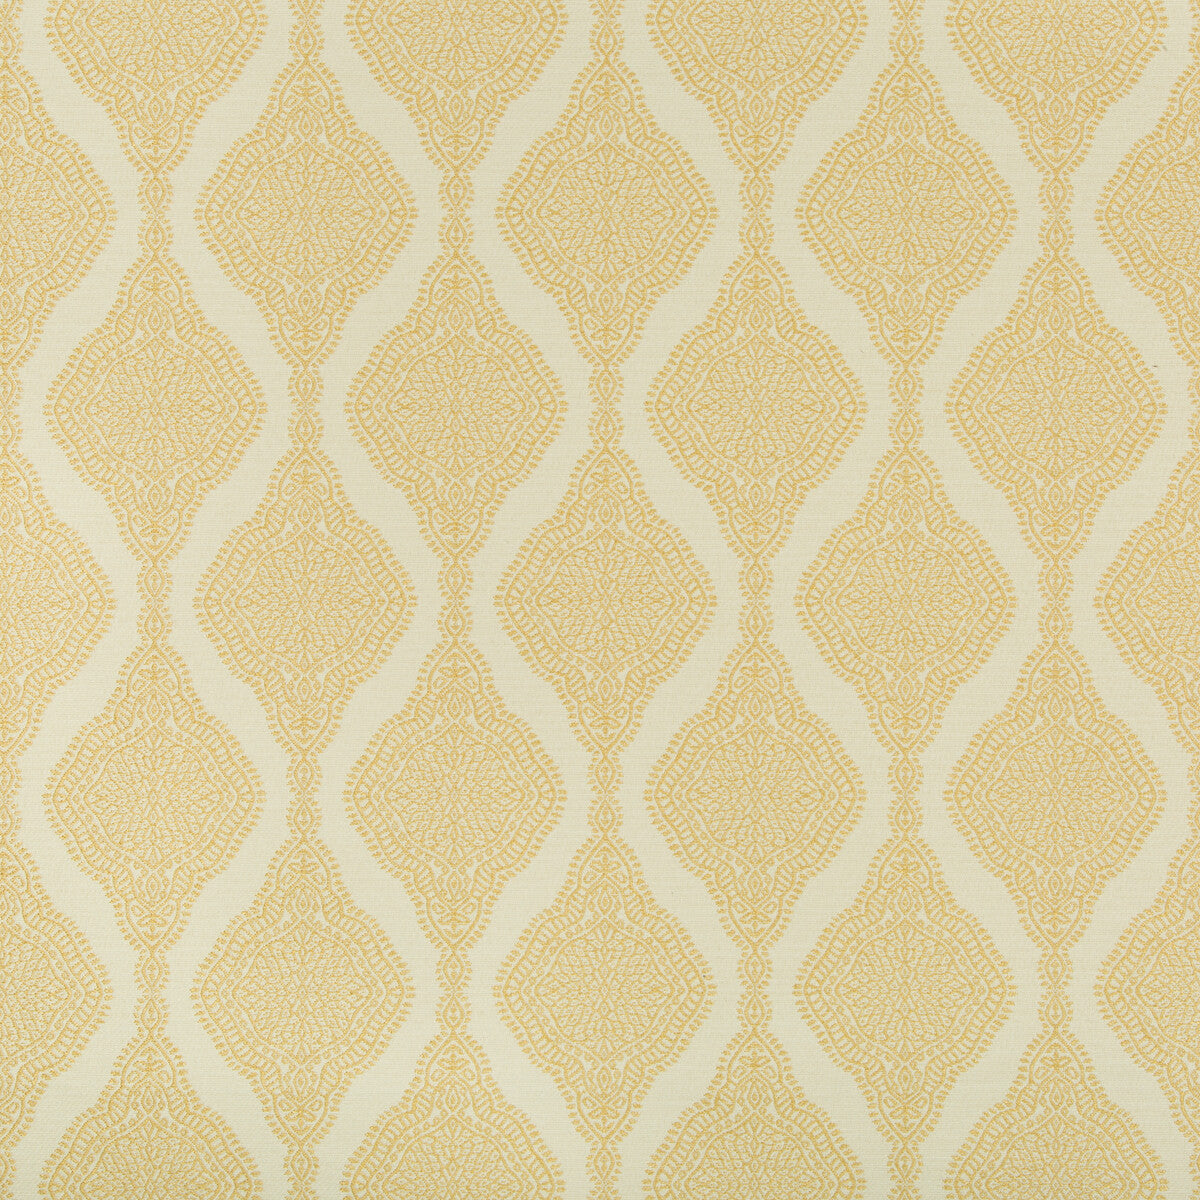 Liliana fabric in honey color - pattern 32935.14.0 - by Kravet Contract in the Gis Crypton collection